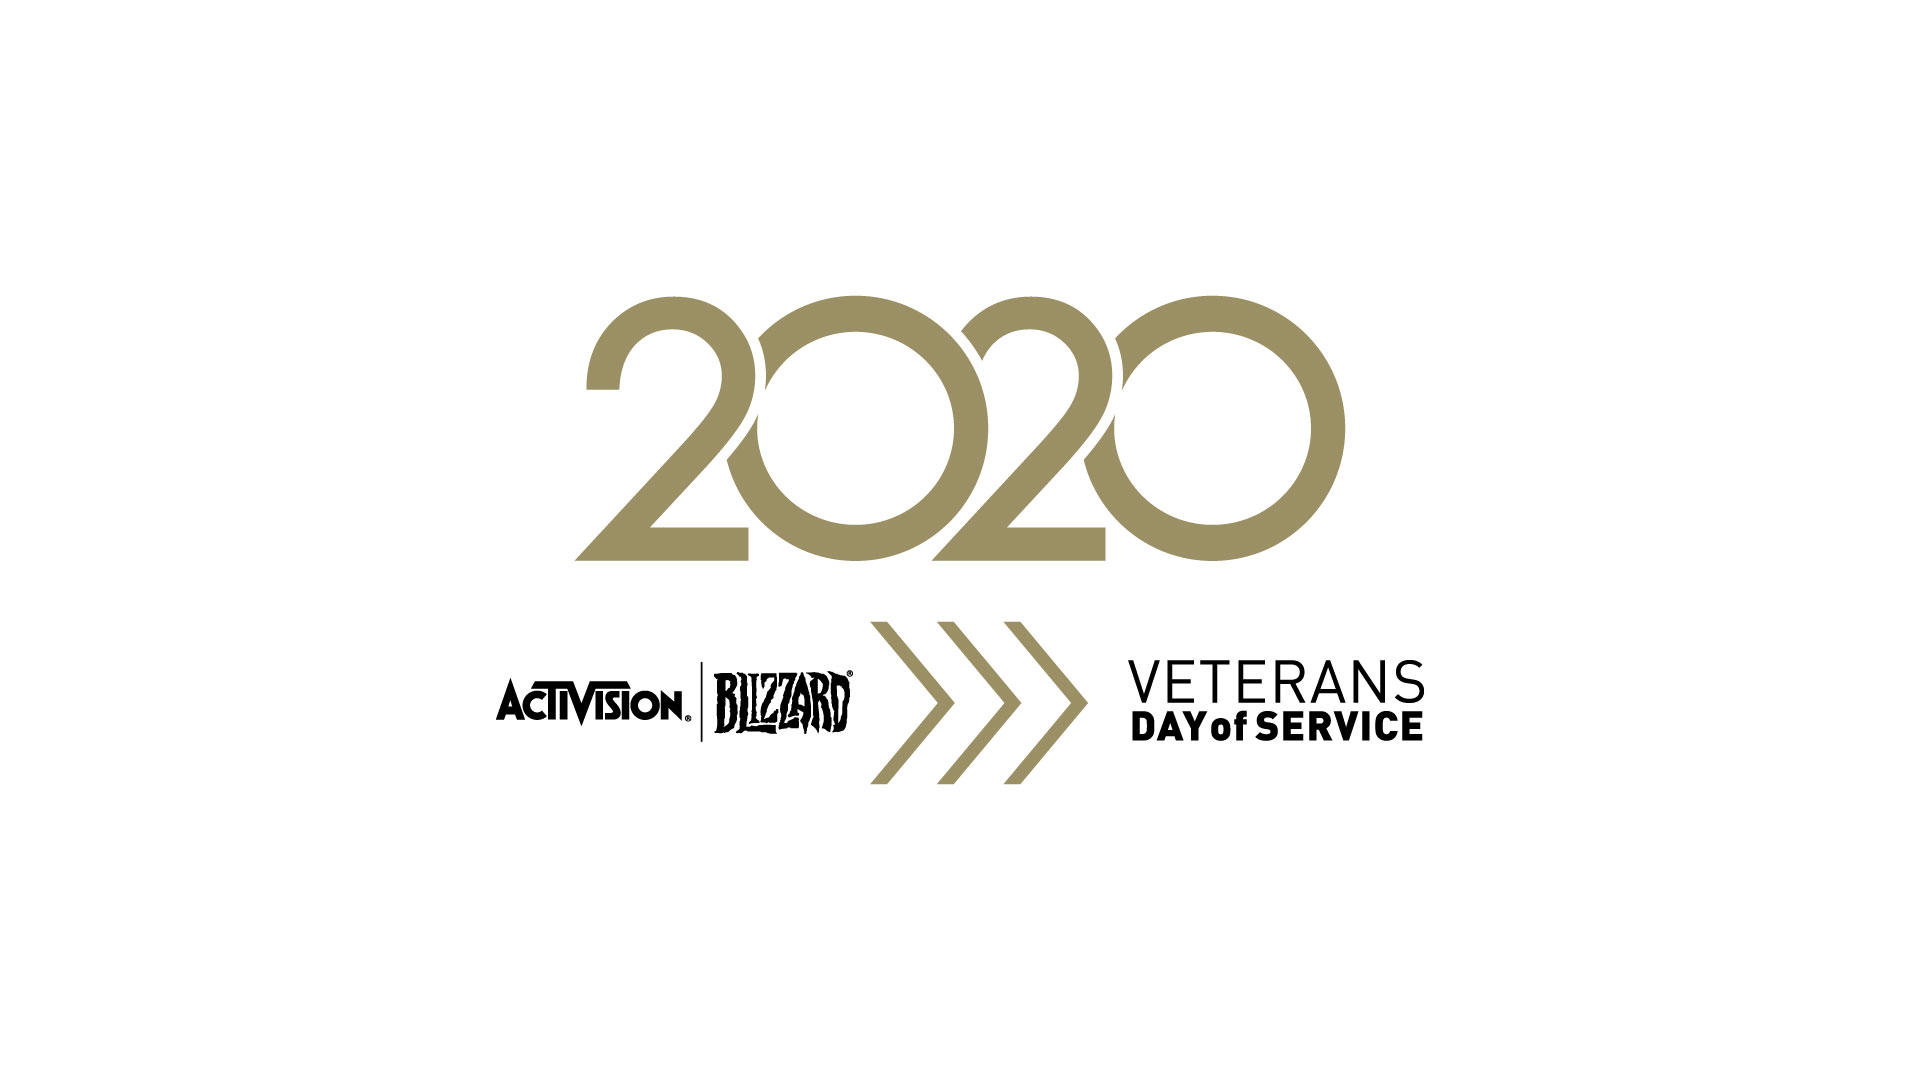 The 7th Annual Activision Blizzard Veterans Day Of Service